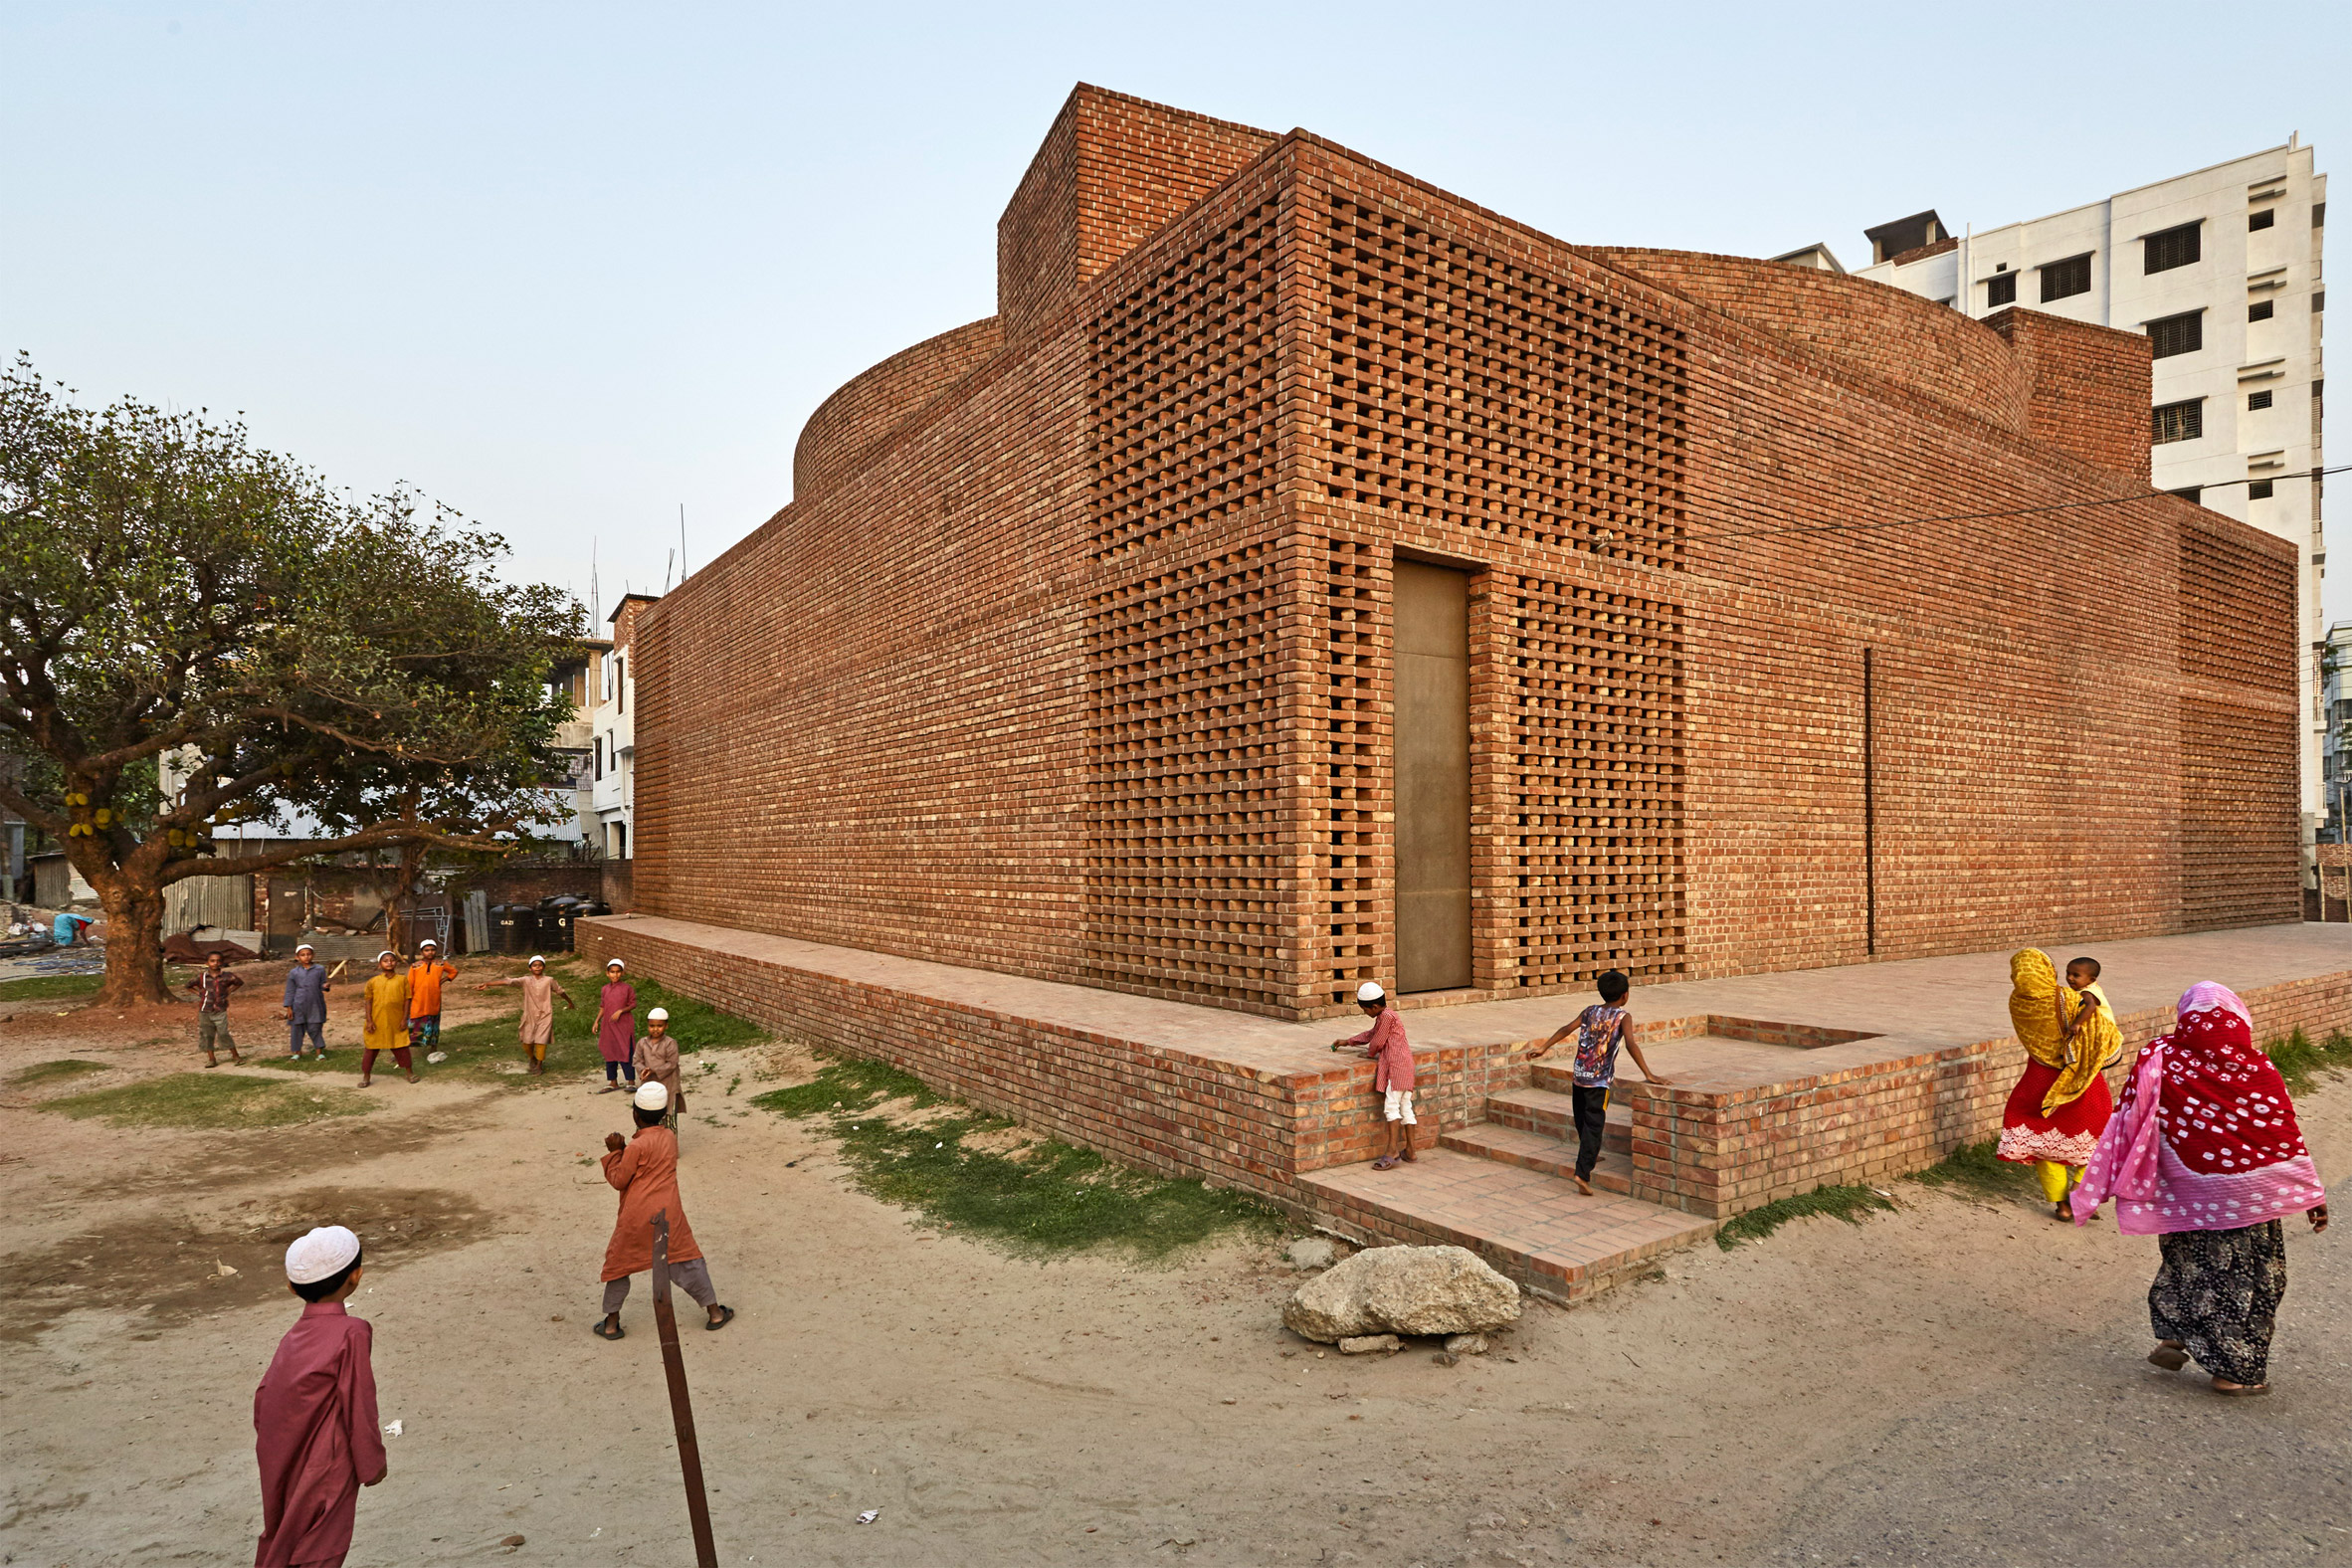 Daylight filters in through the roof and walls of Bangladeshi mosque by Marina Tabassum